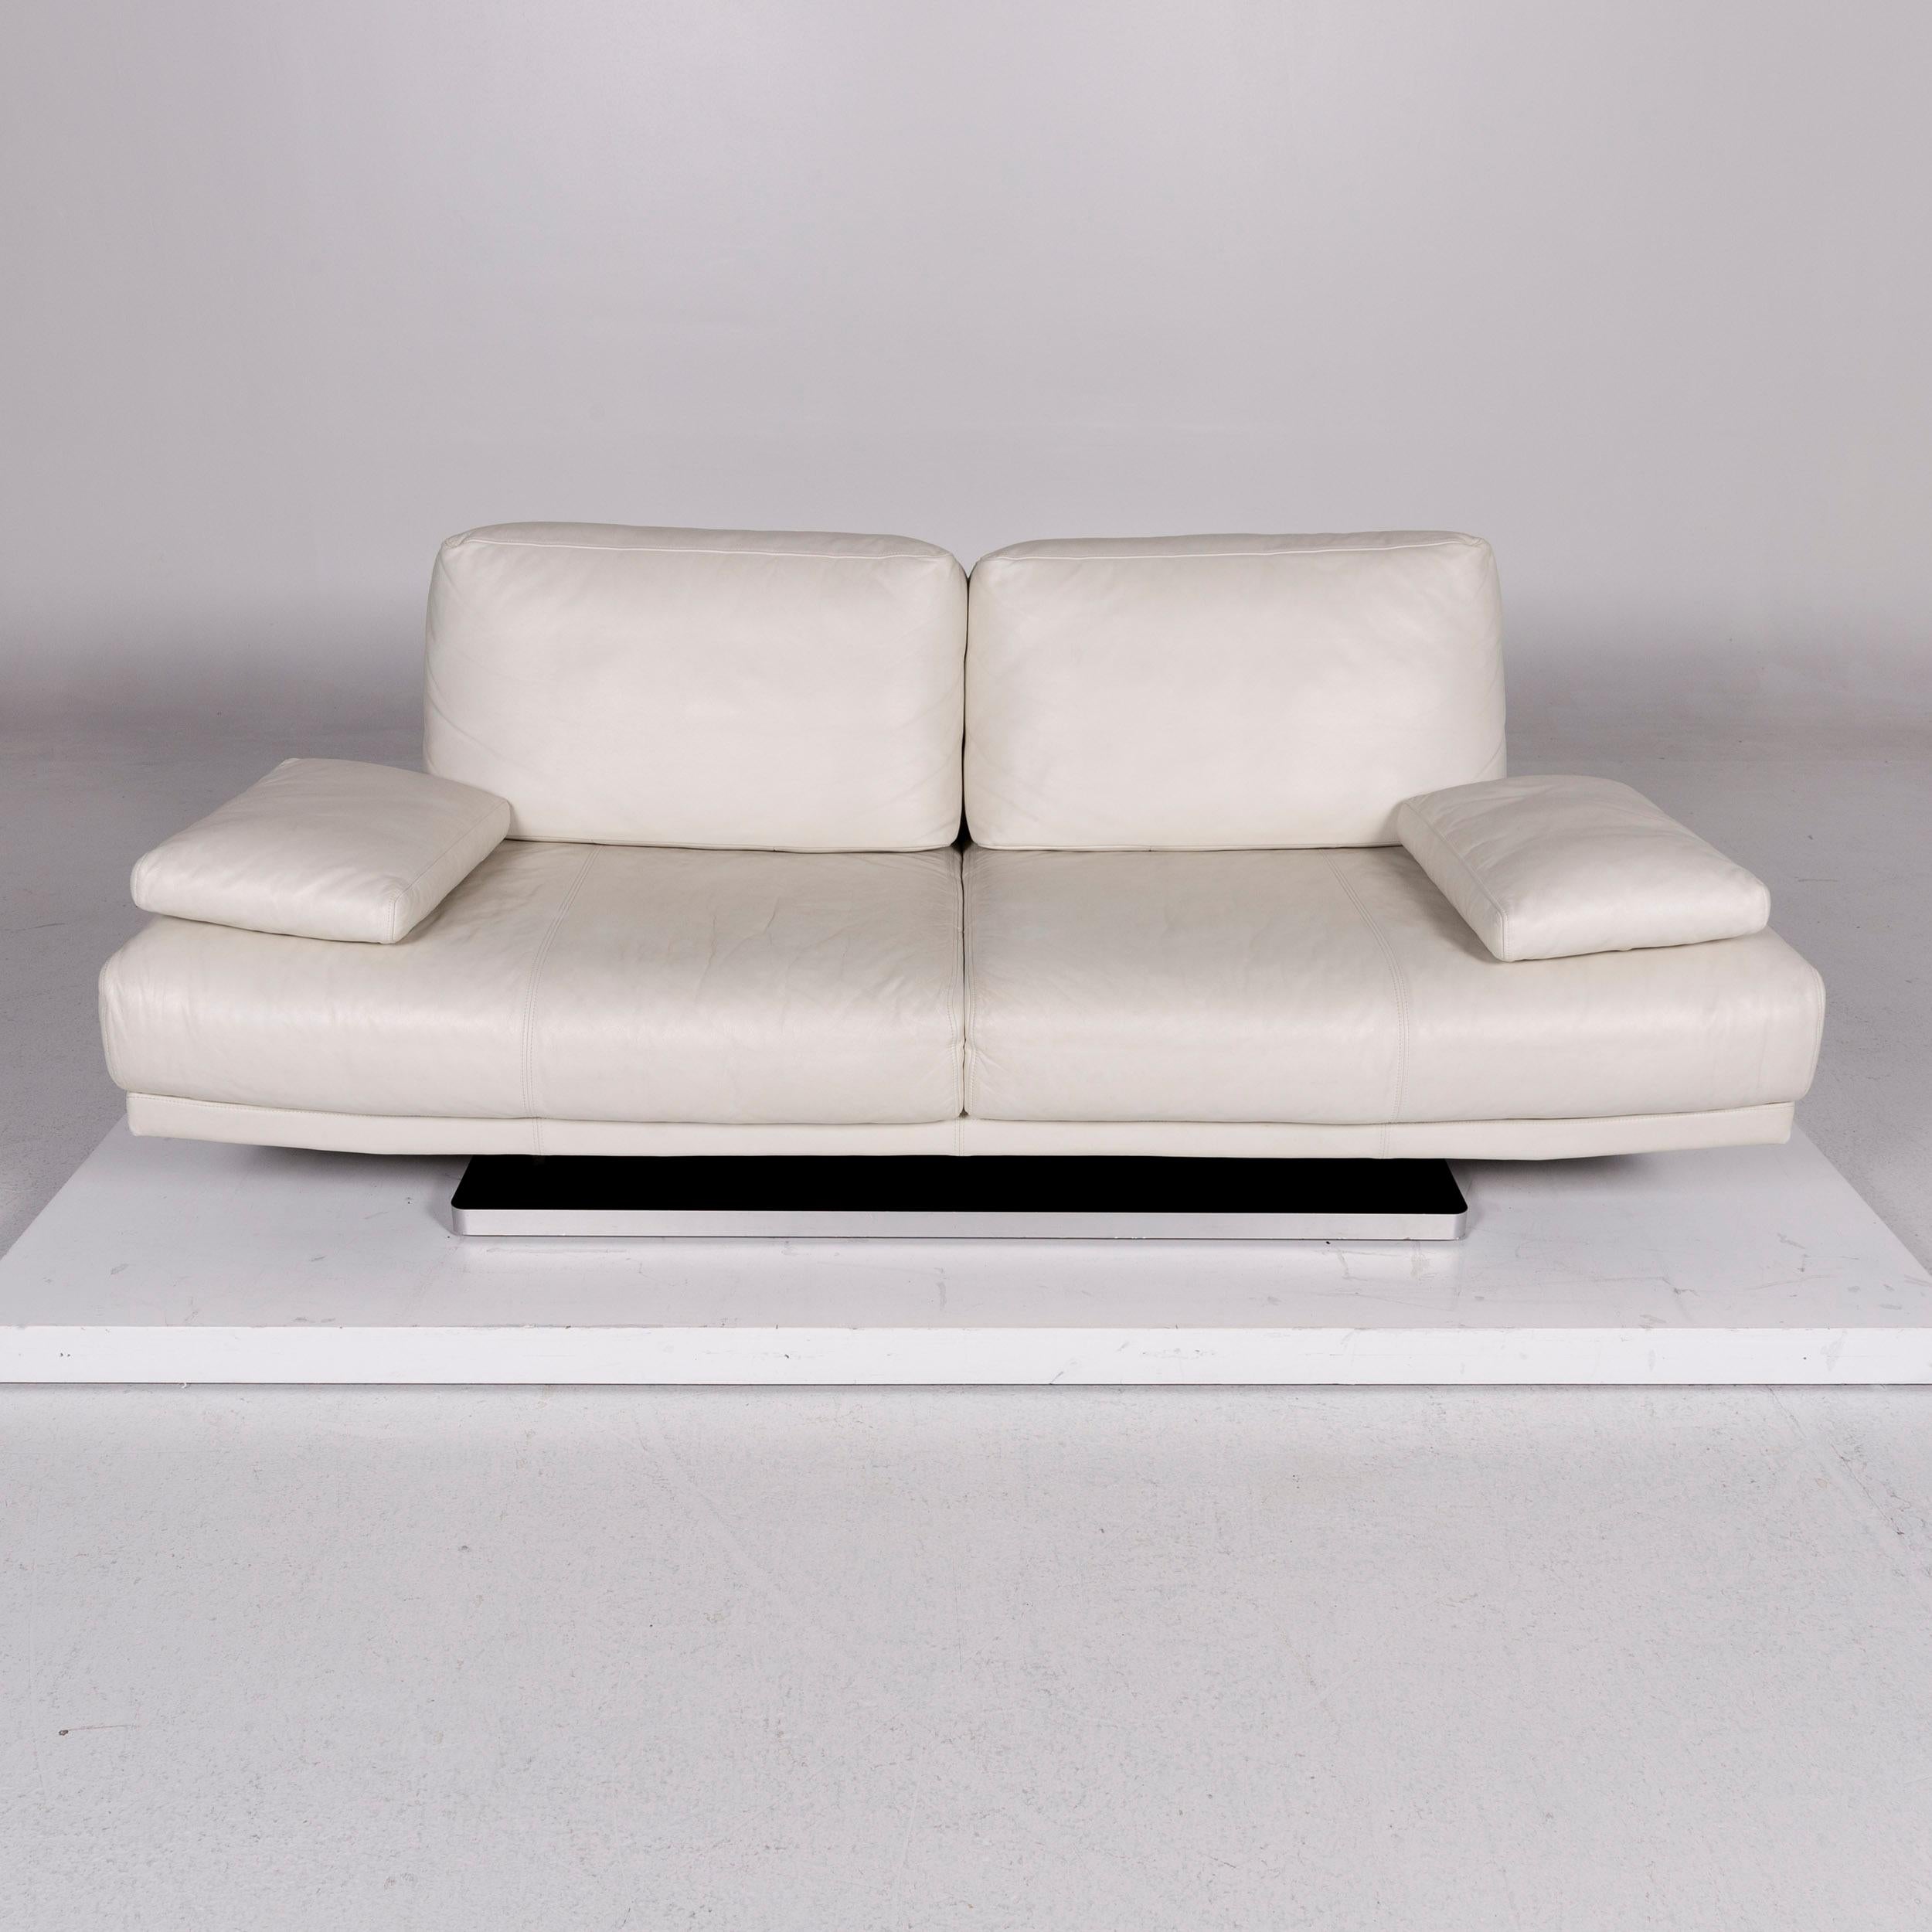 German Rolf Benz Rolf Benz 345 Leather Sofa White Two-Seat Couch